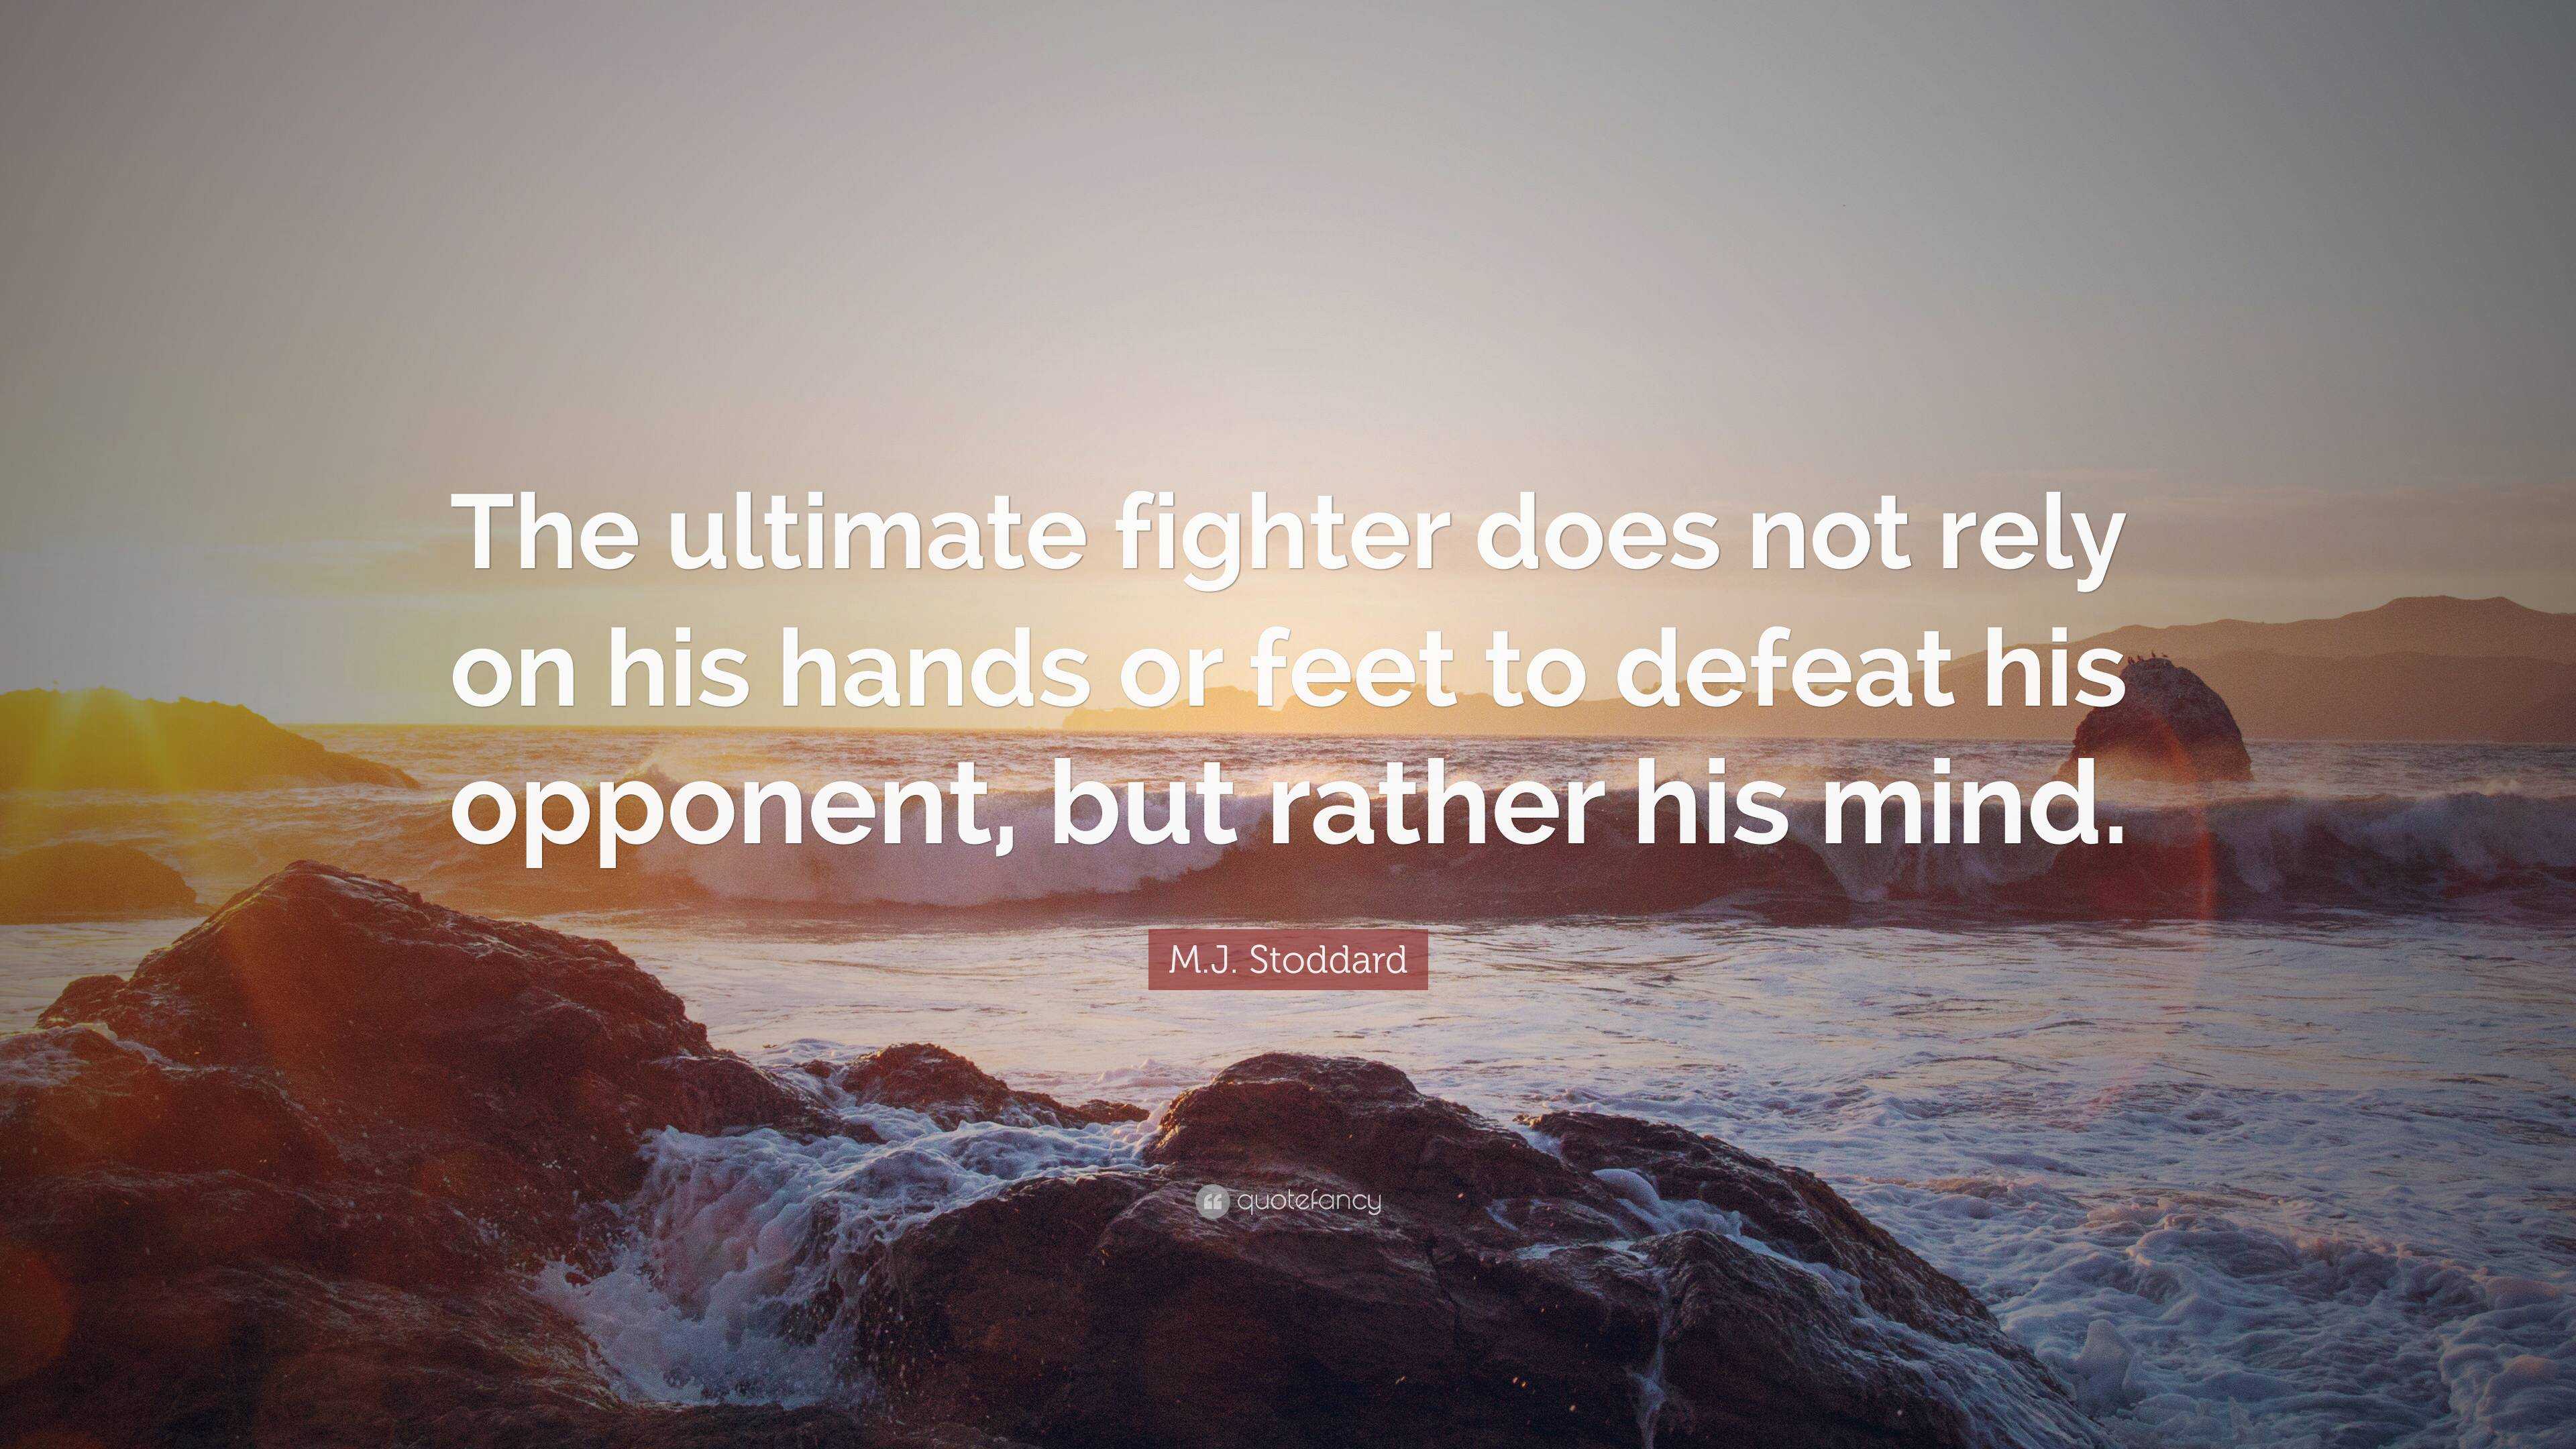 https://quotefancy.com/media/wallpaper/3840x2160/6661671-M-J-Stoddard-Quote-The-ultimate-fighter-does-not-rely-on-his-hands.jpg